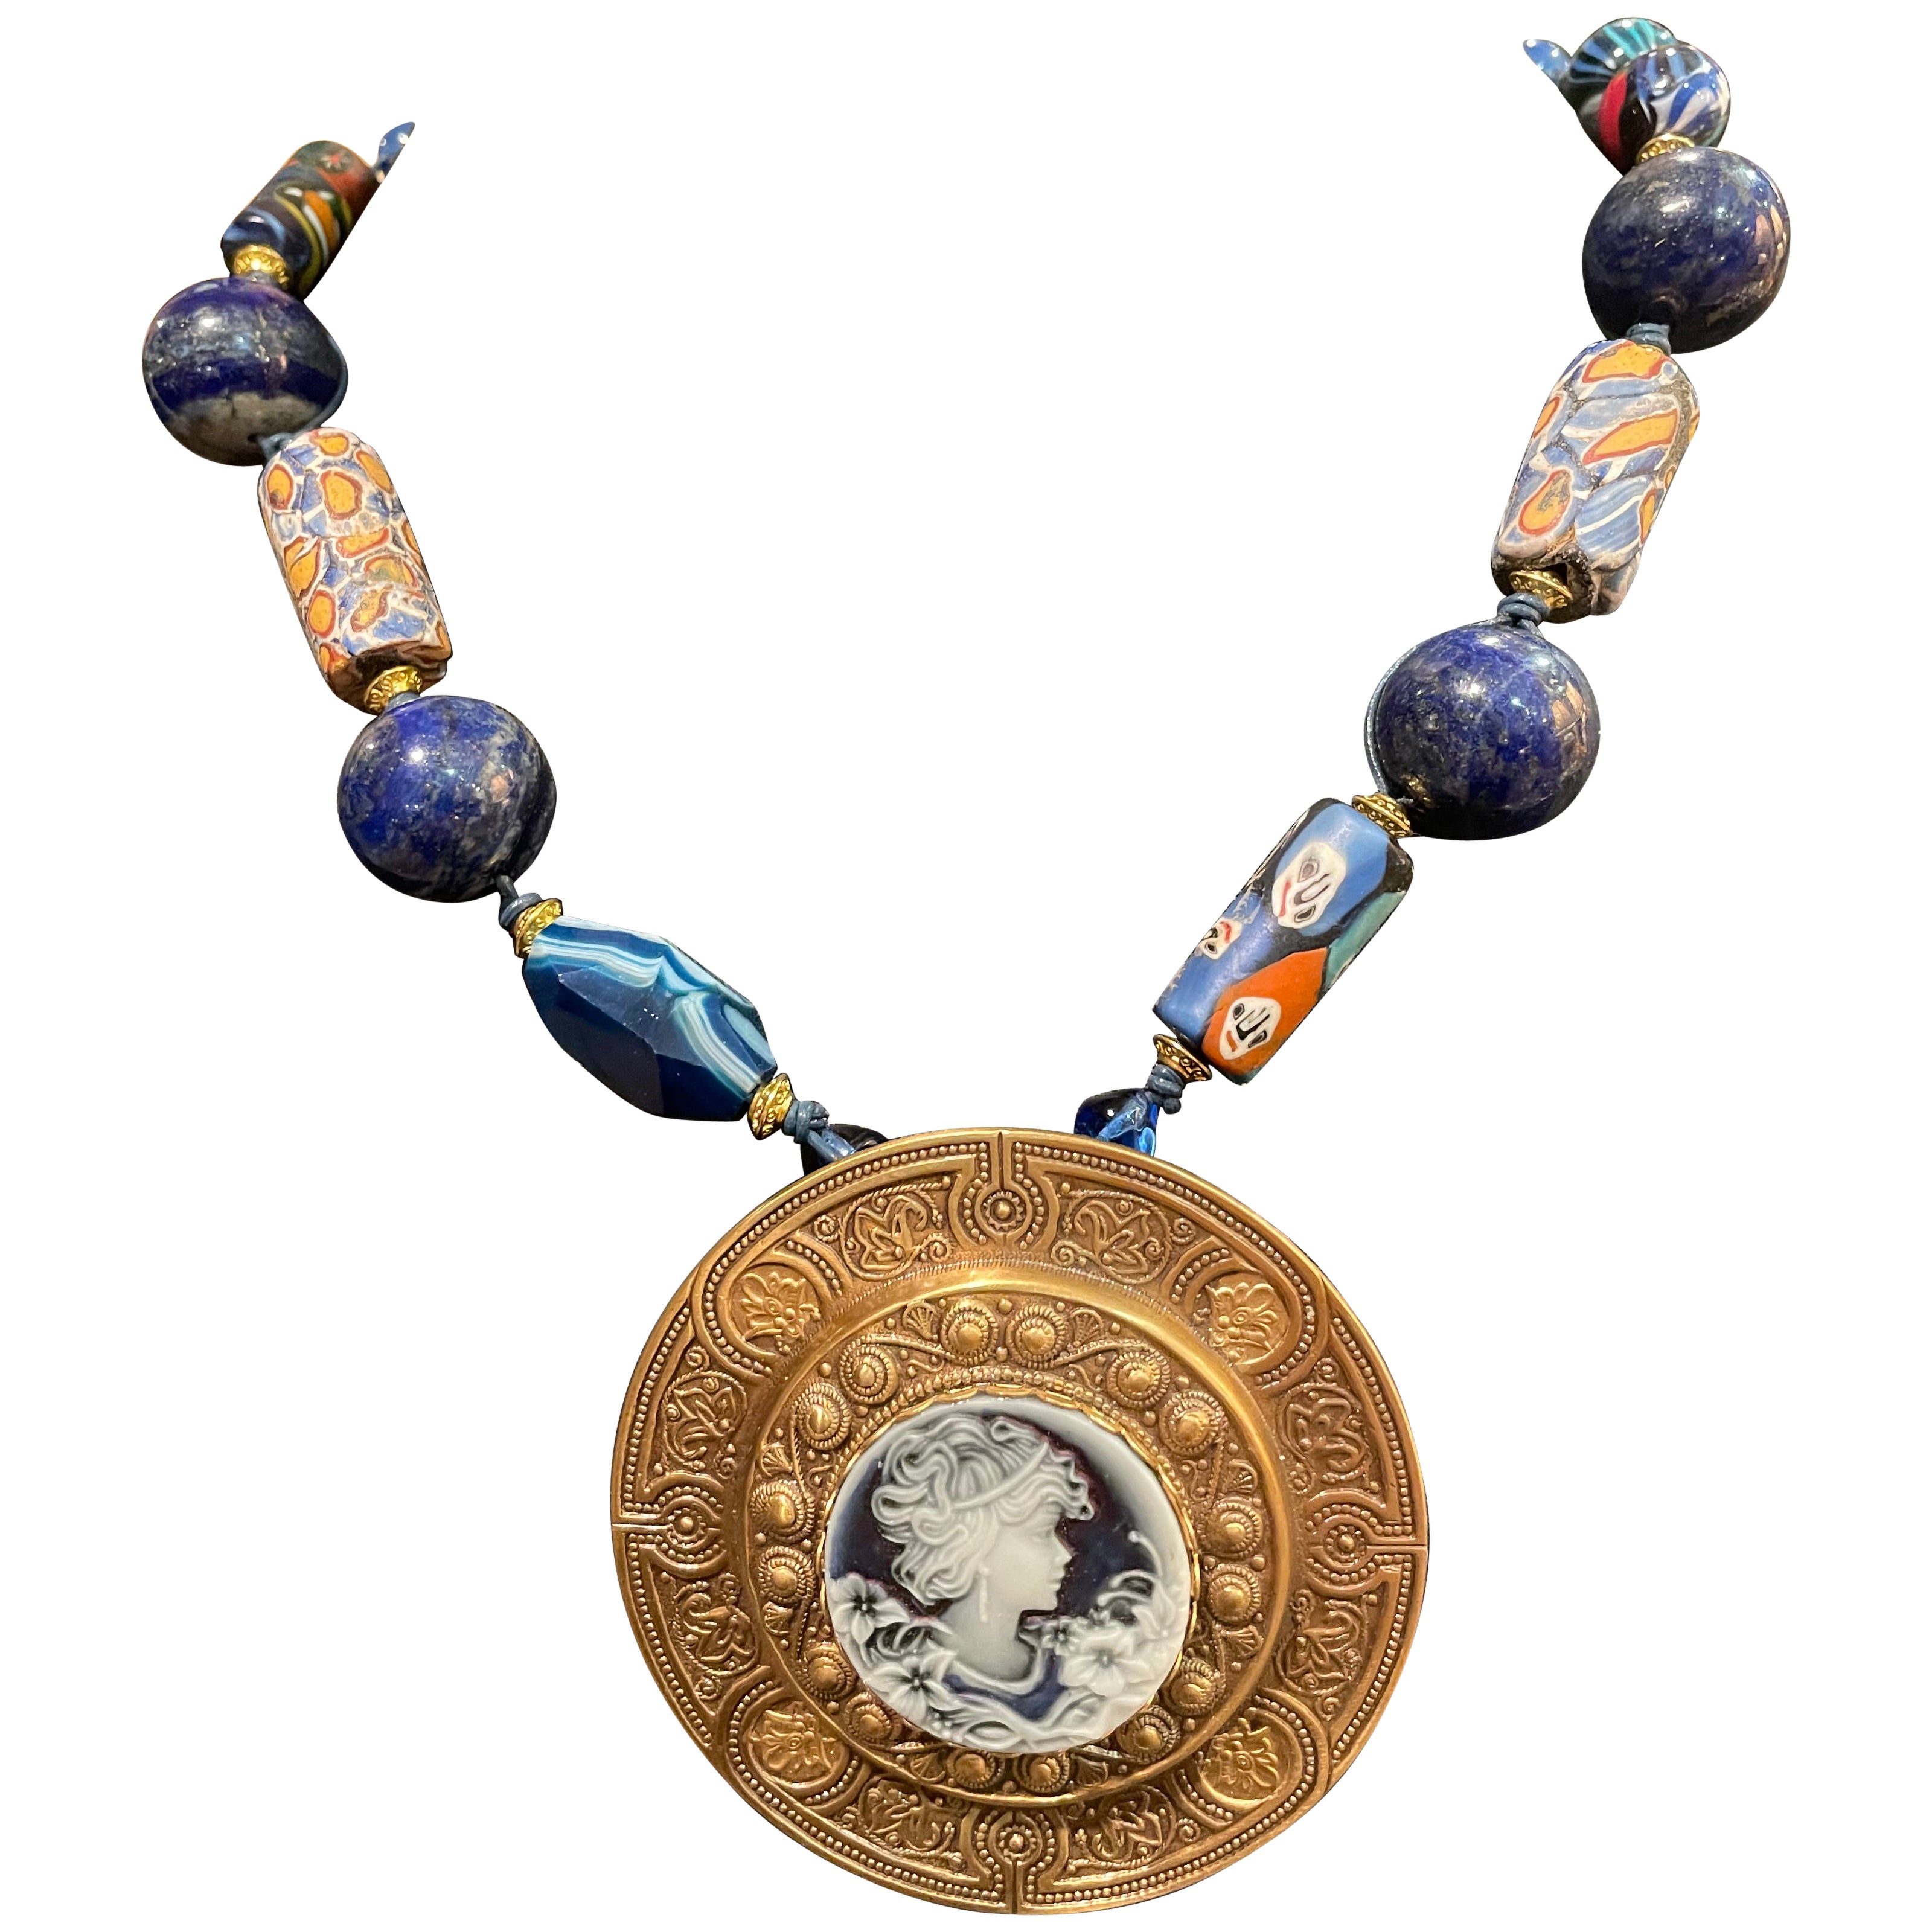 LB offers a vintage style Brass and Resin pendant with Murano glass and Lapis For Sale